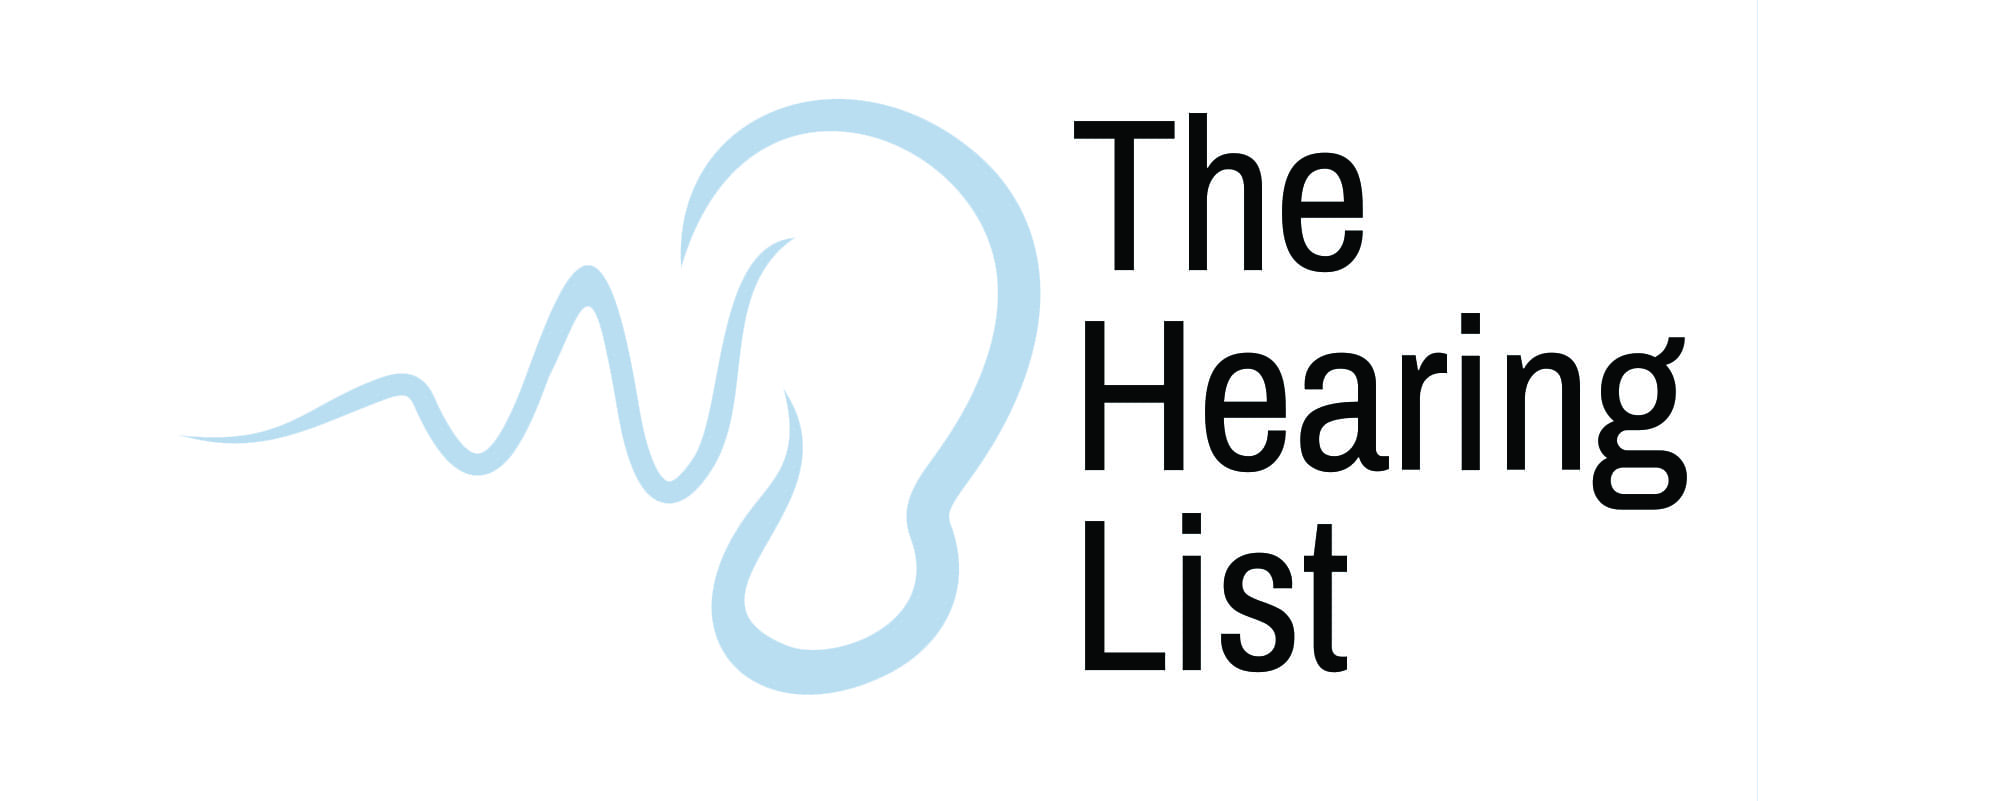 The Hearing List